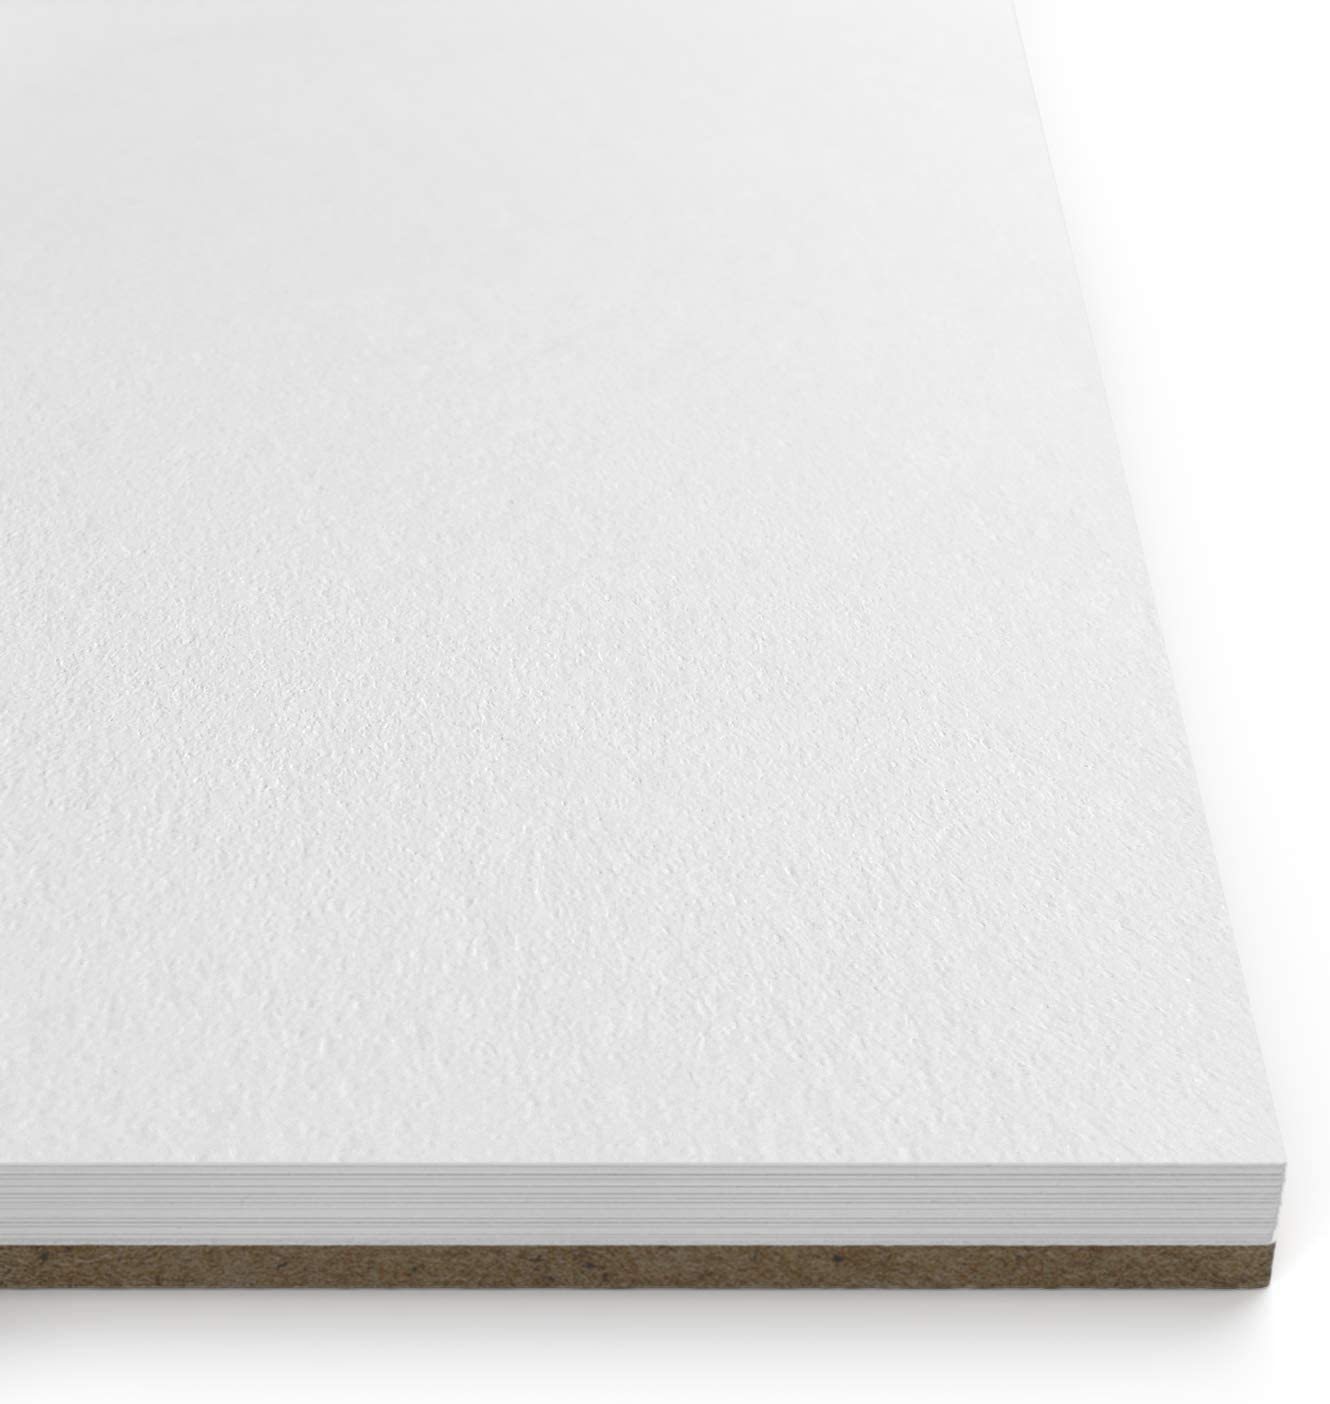 Arteza 9 inch x 12 inch Drawing Pad, 80 Pages (80lb/130g), White